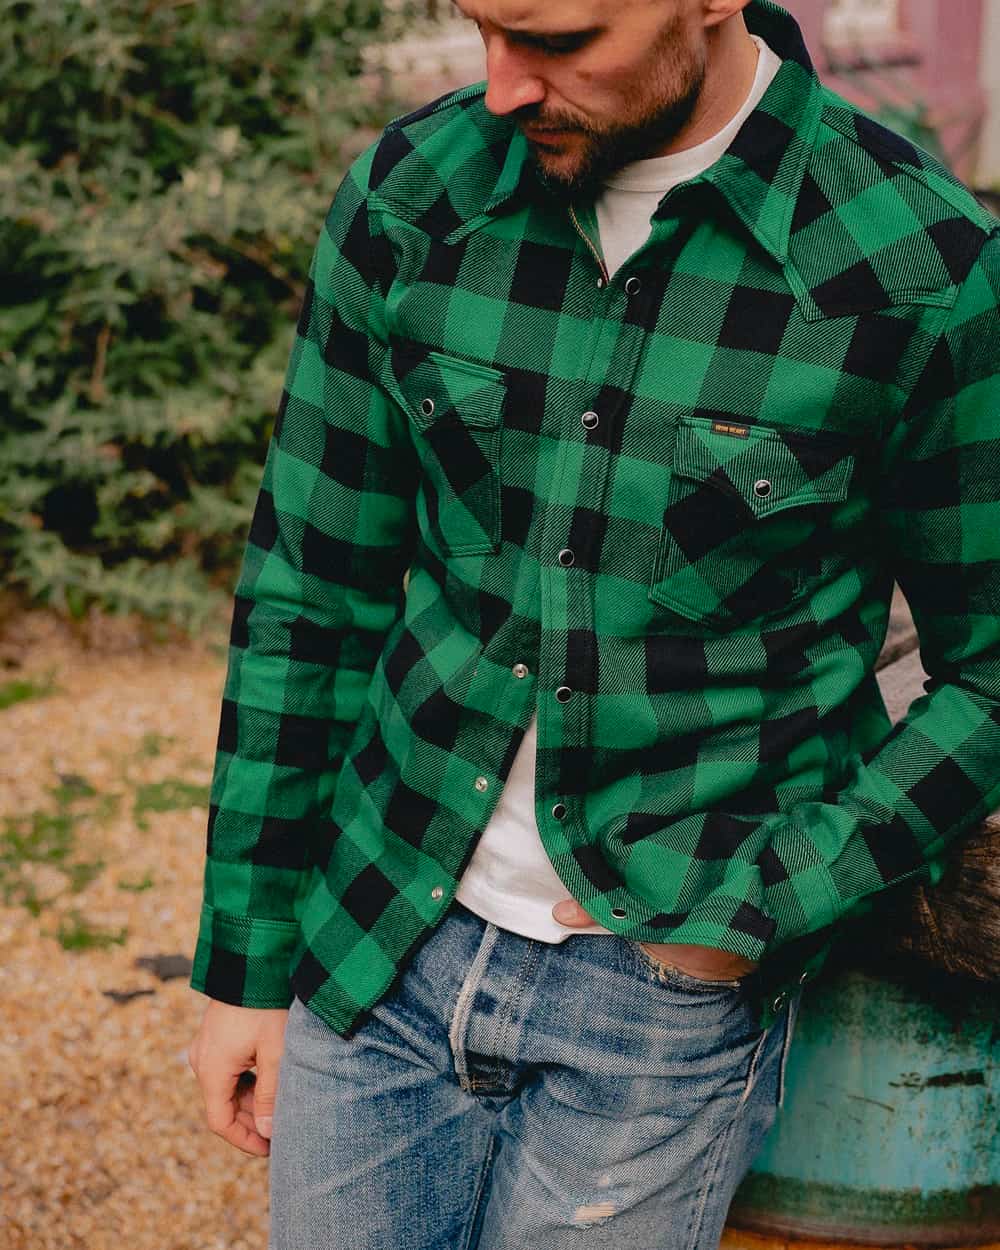 Man wearing a heavy green/black check flannel shirt by Iron Heart with faded jeans and a white T-shirt